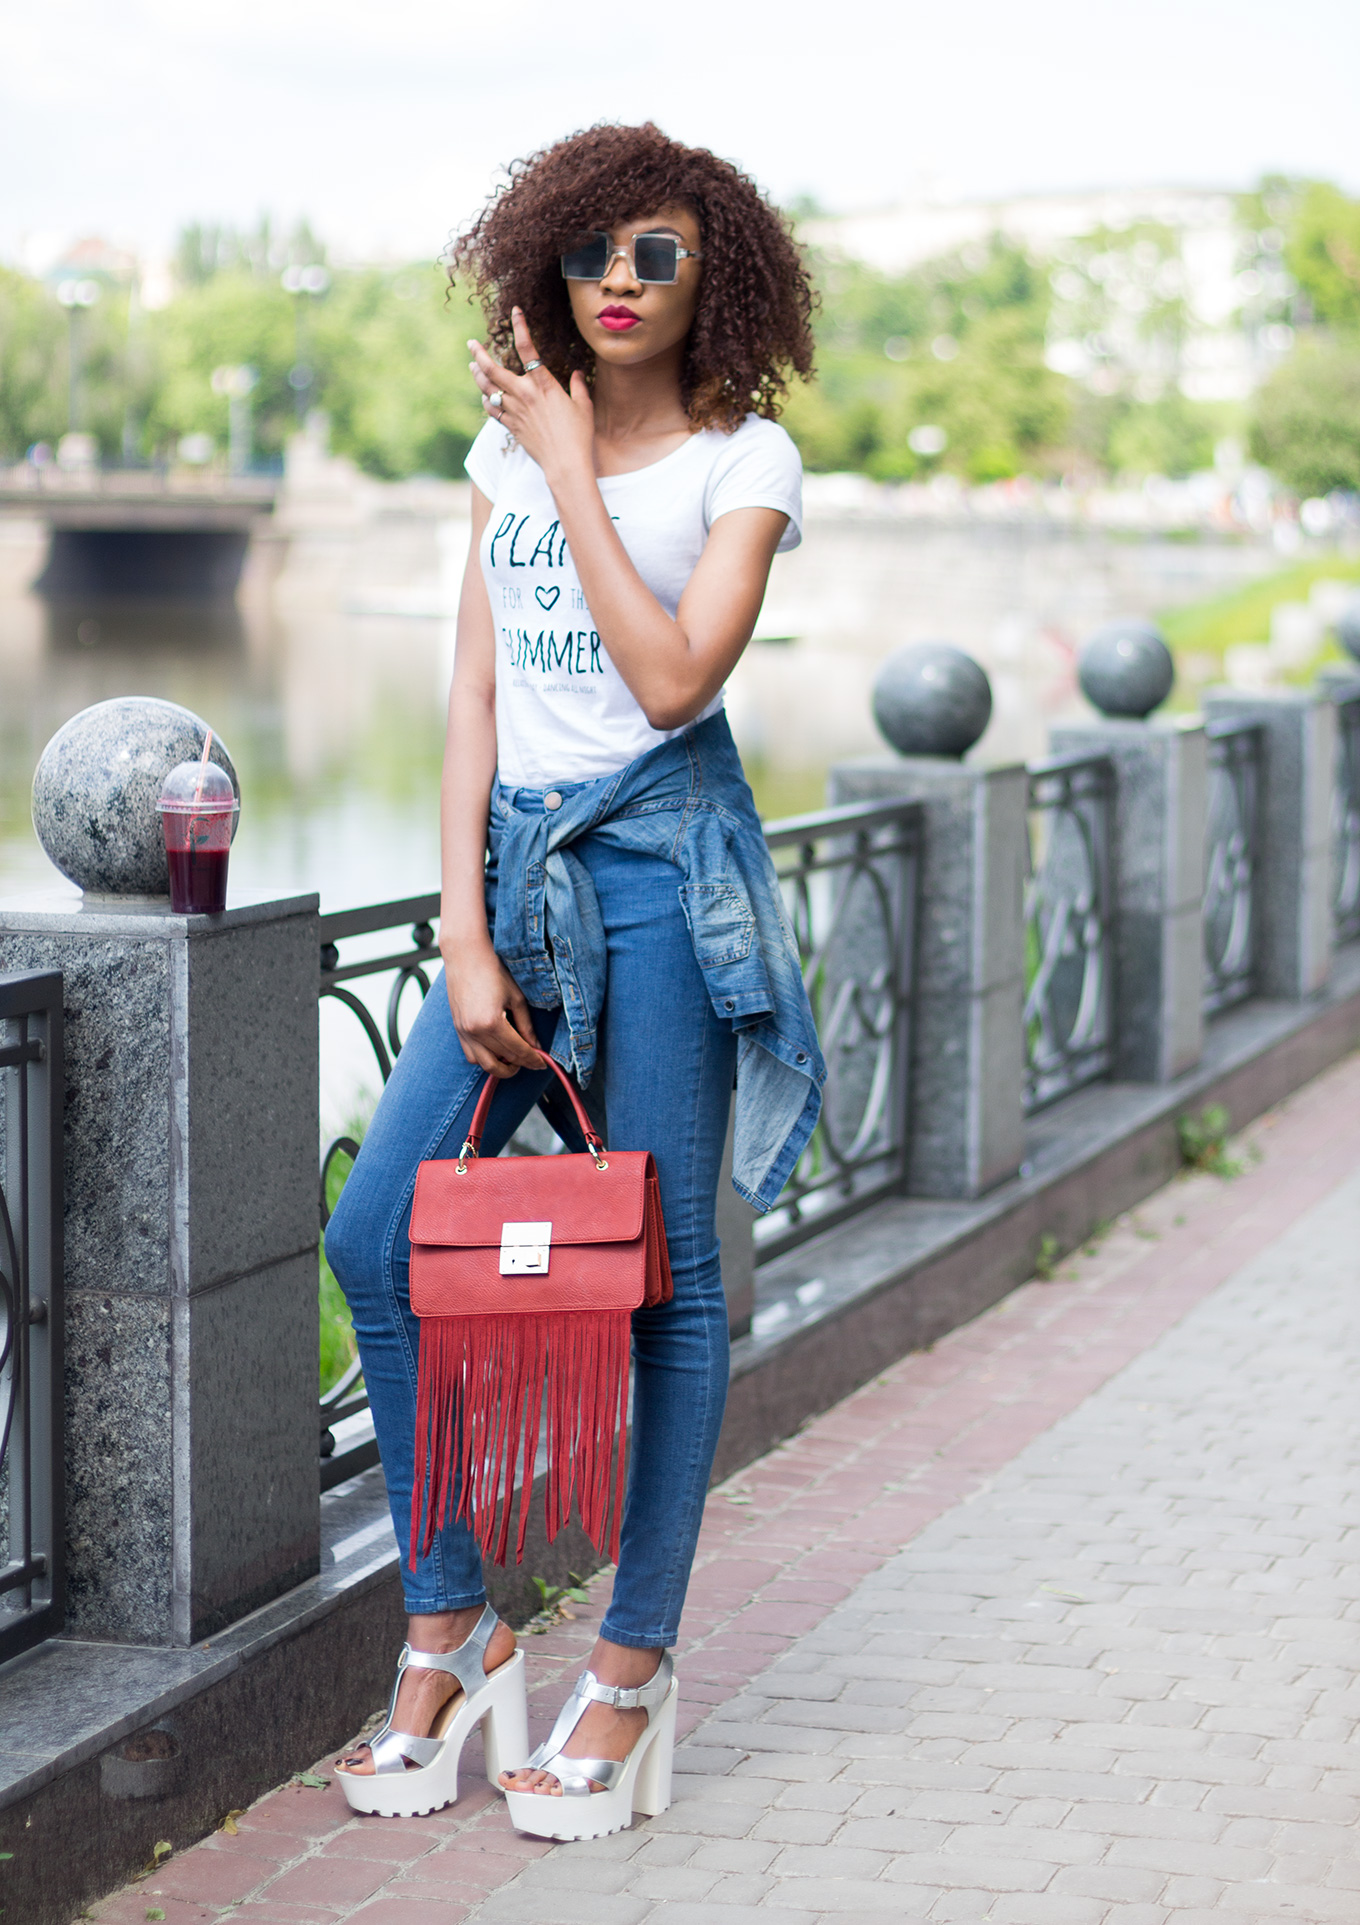 Casual jeans and tee outfit for summer